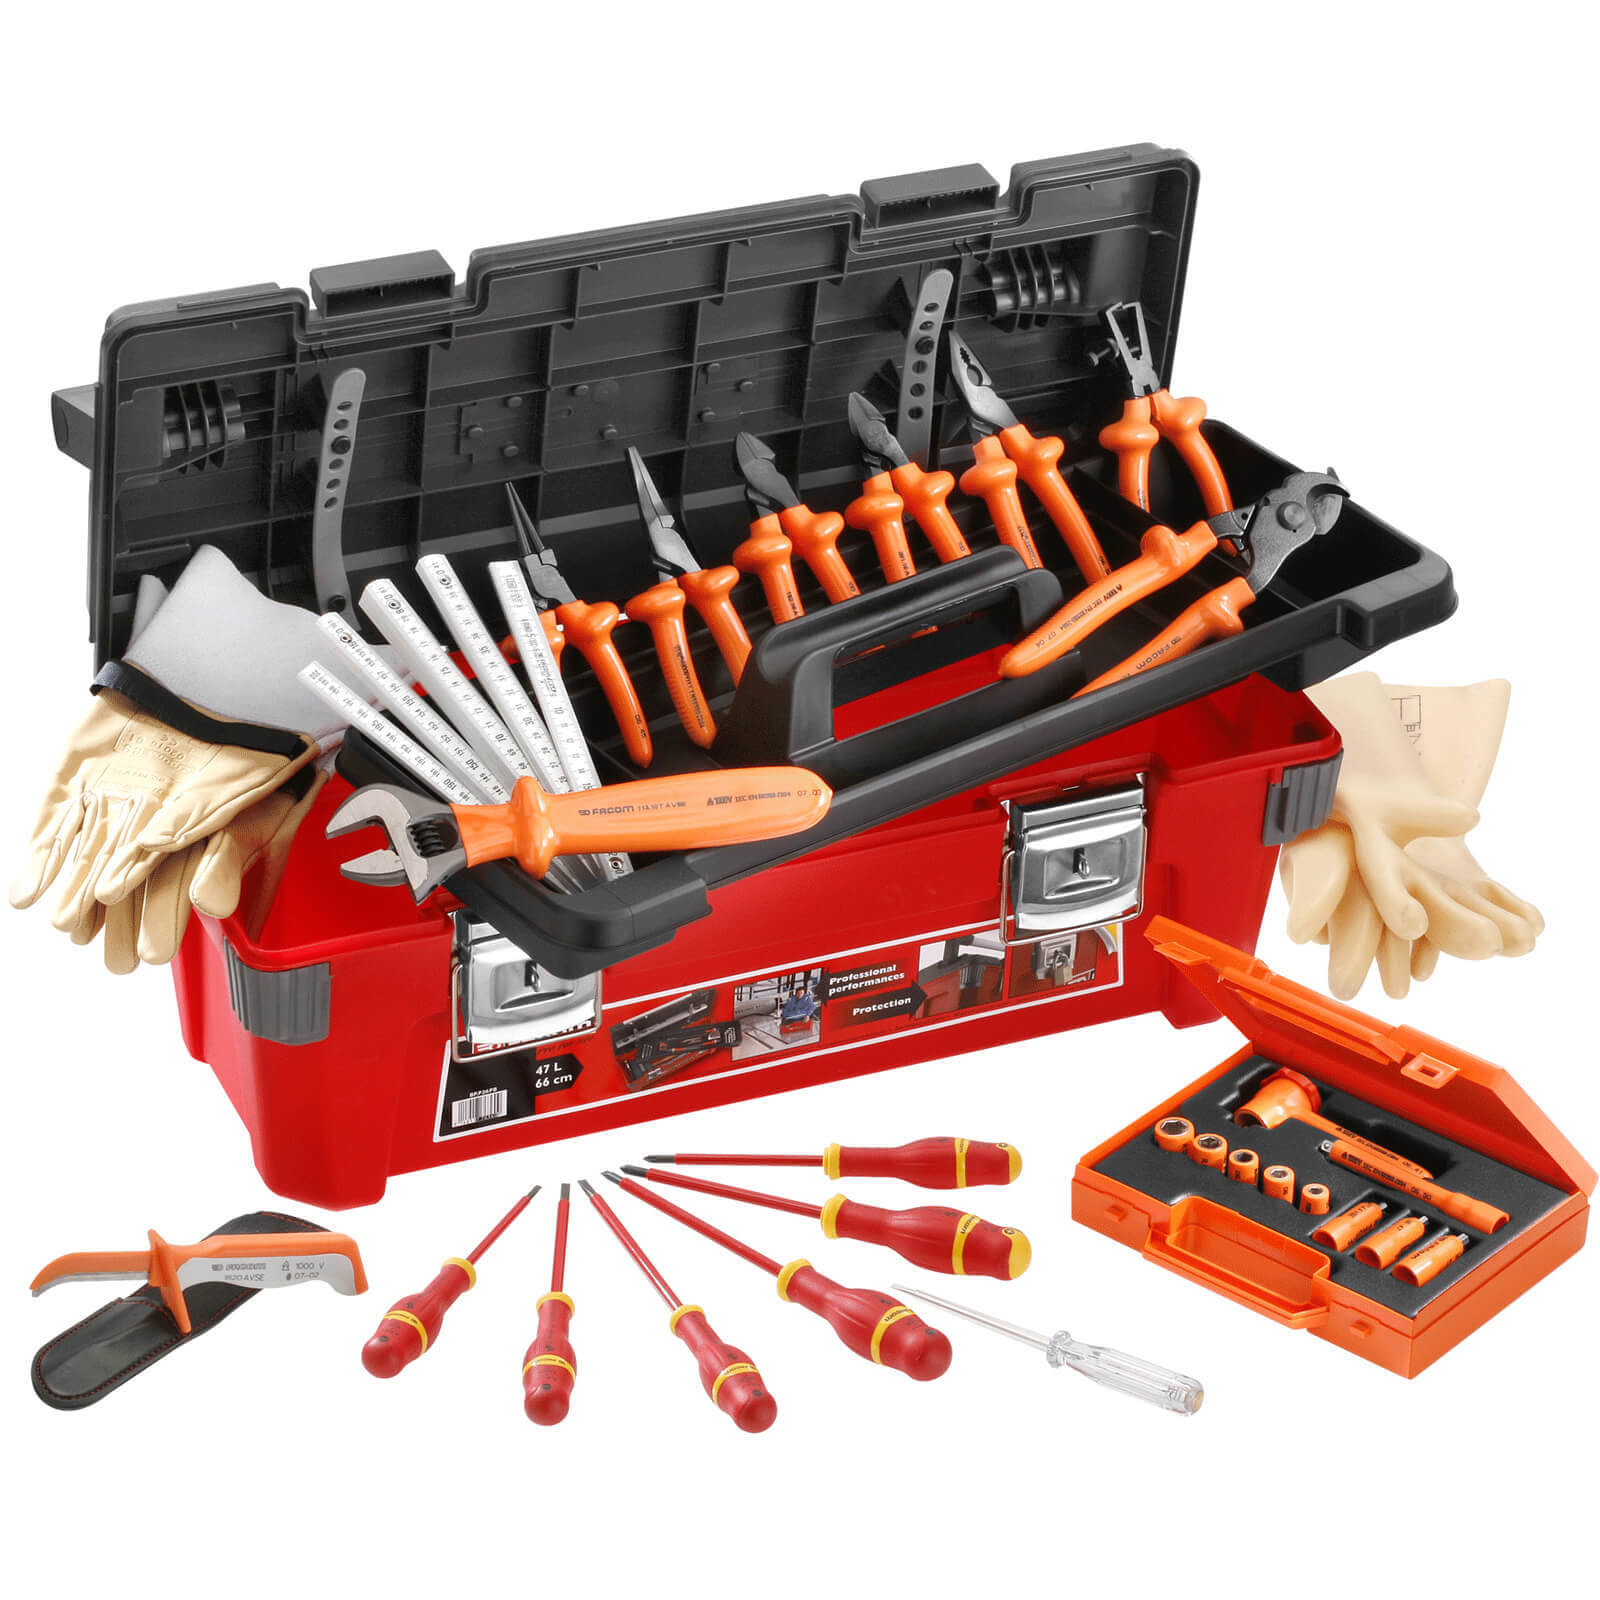 Photo of Facom 2185c.vse 20 Piece Insulated Hand Tool Kit